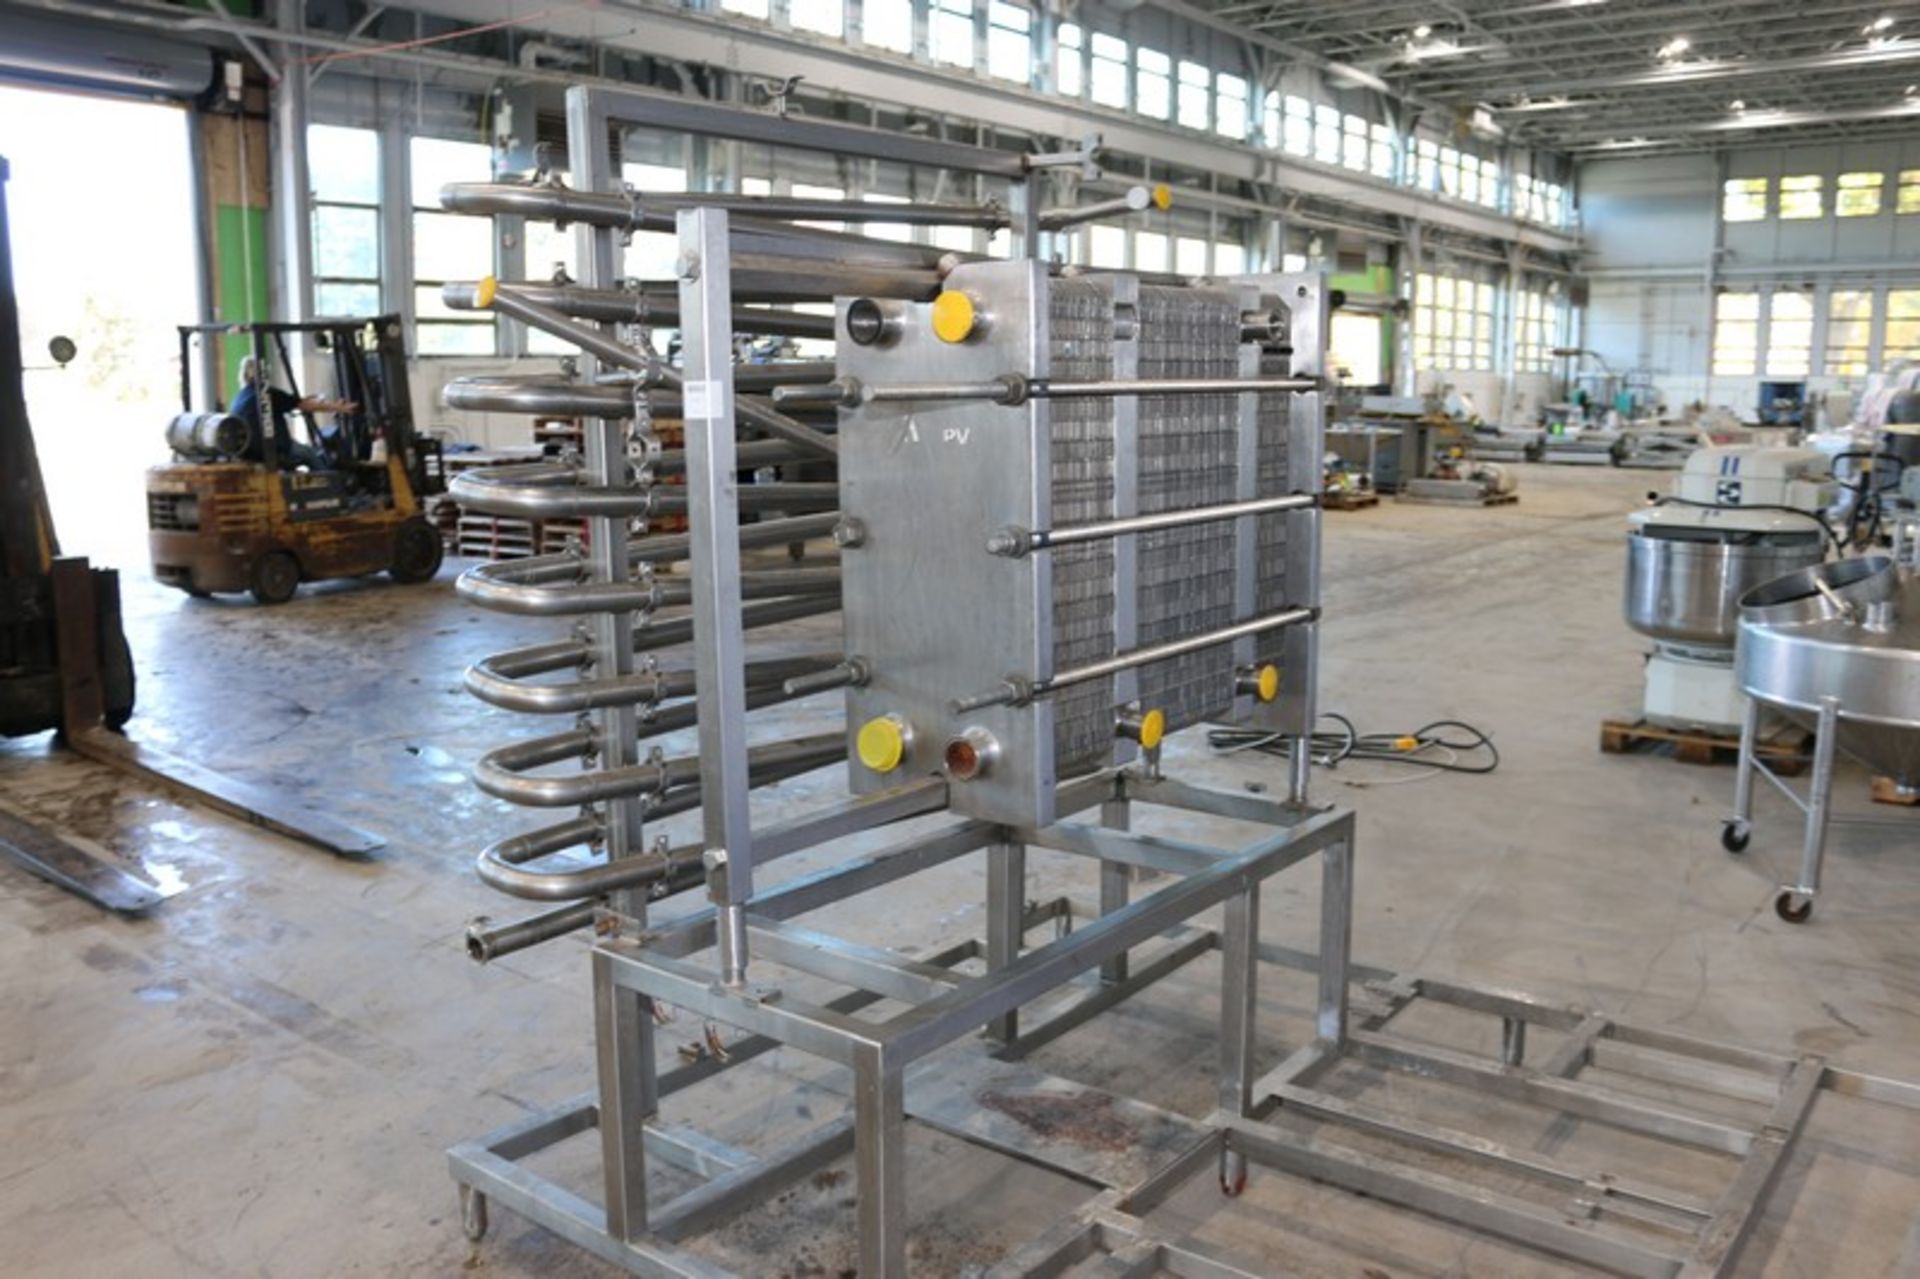 S/S Pasteurization Skid, Includes APV 3-Section Plate Heat Exchanger, M/N SP250-S, S/N 20332, with - Image 7 of 10